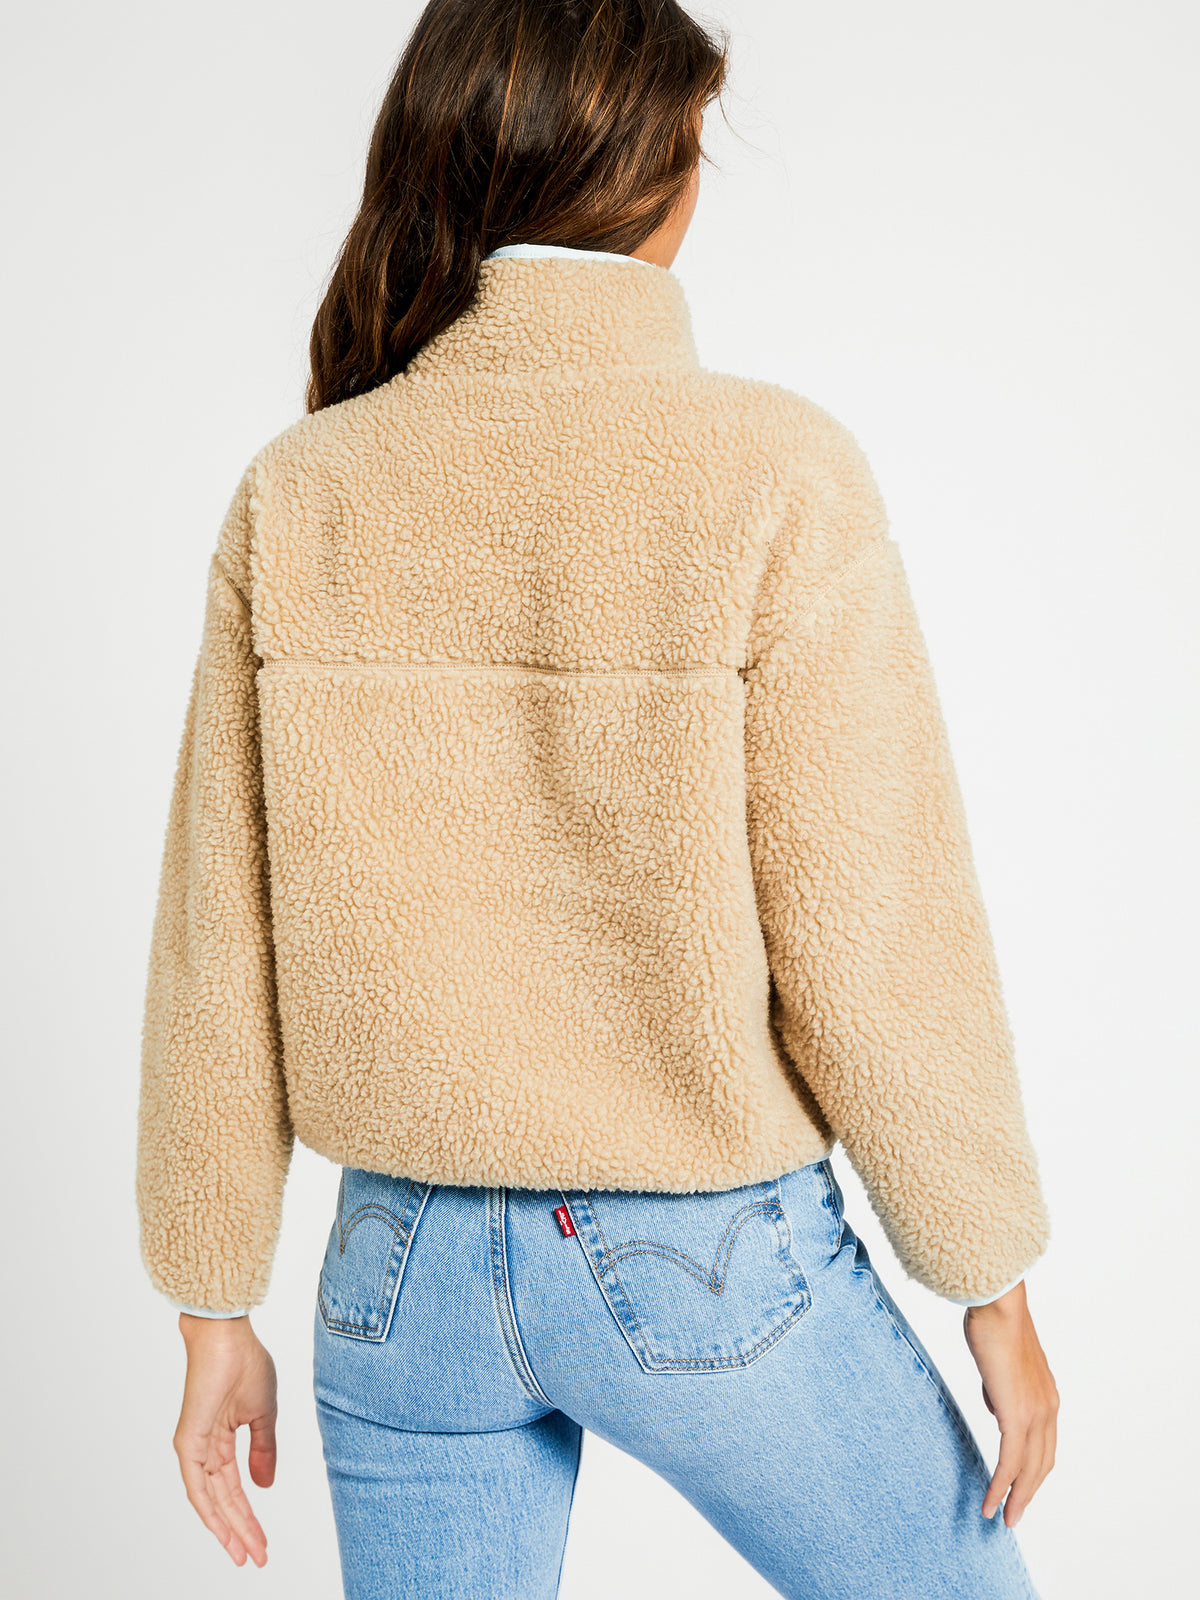 Solane Sherpa Pullover in Oyster Gray